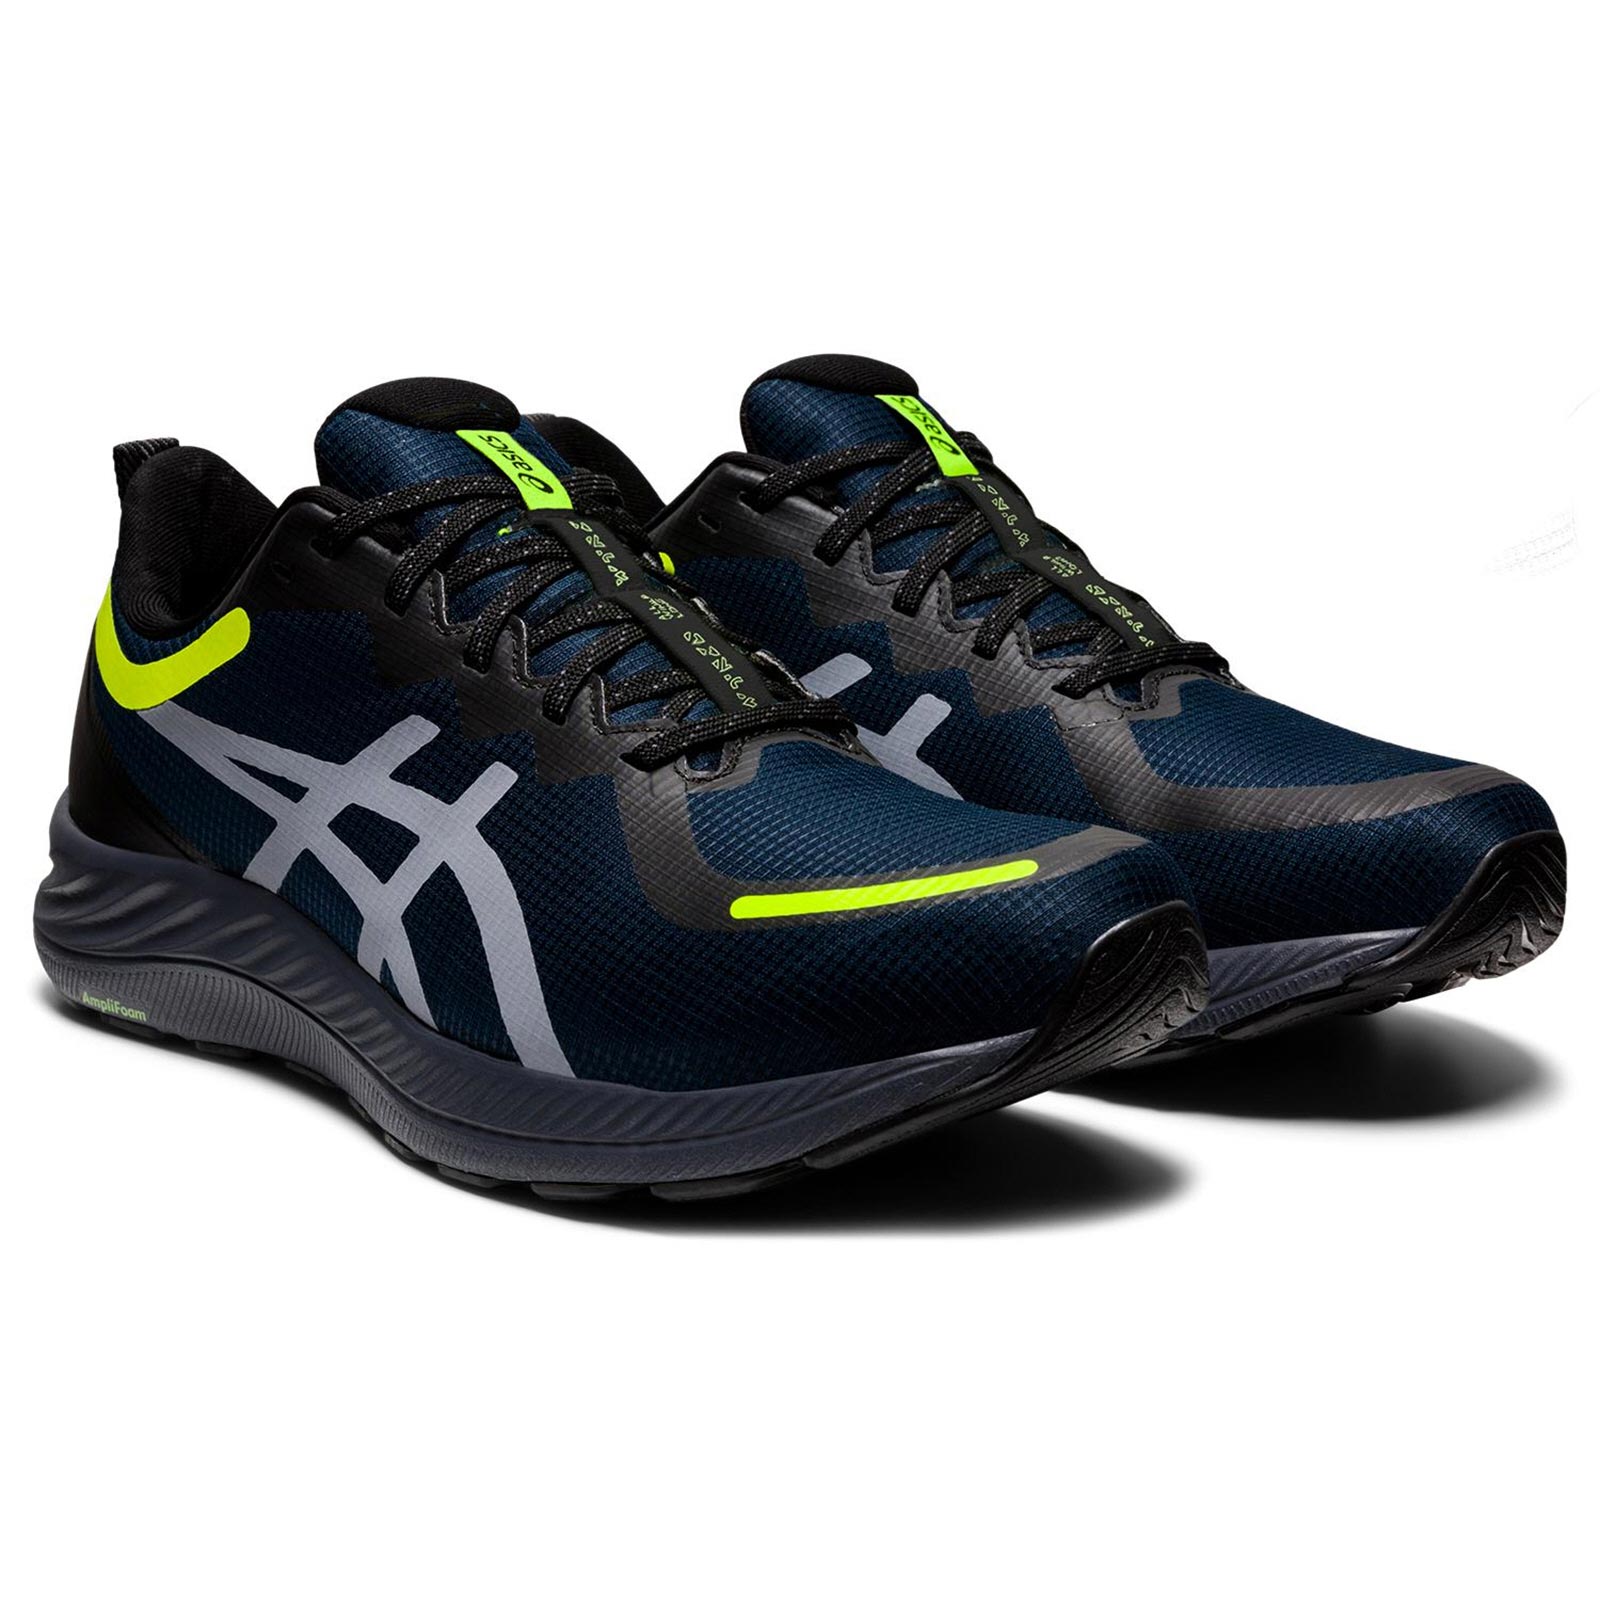 ASICS GEL-EXCITE 8 AWL MENS RUNNING SHOES